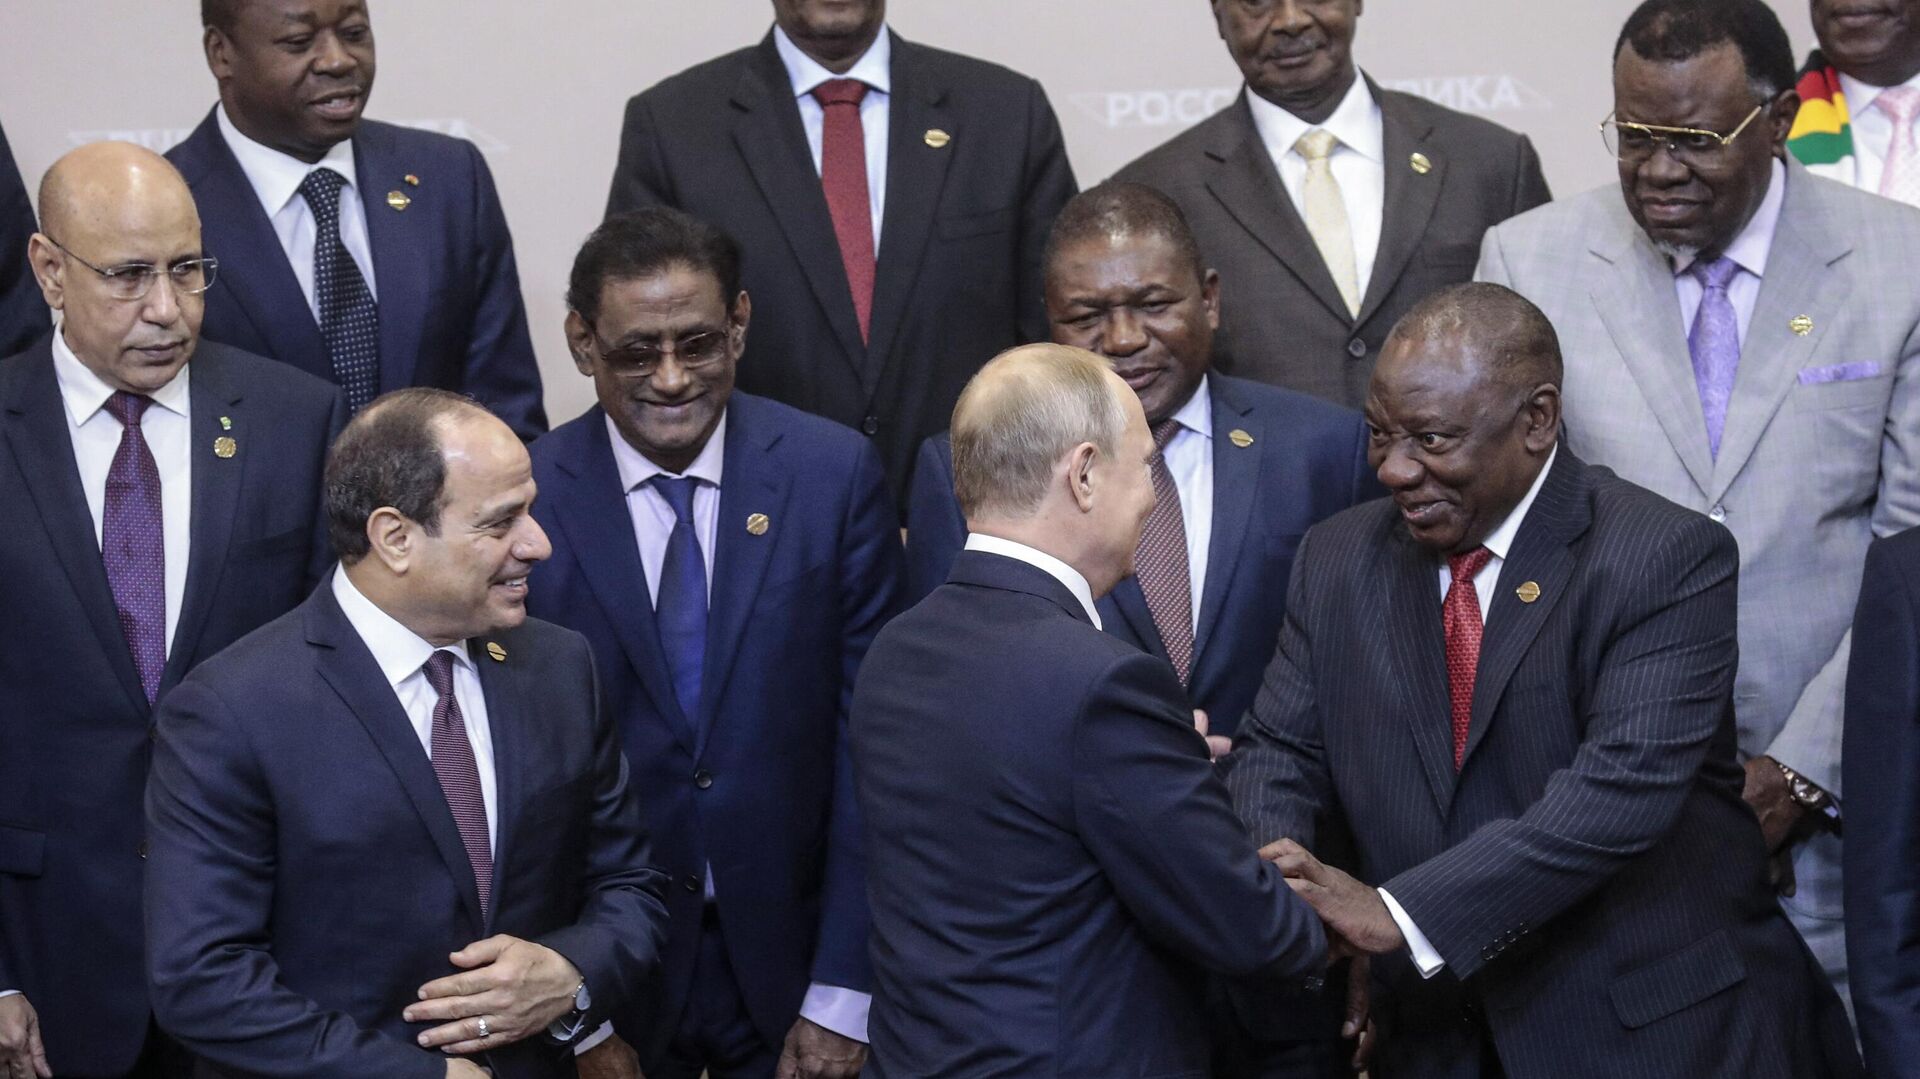 Russian President Vladimir Putin (C) shakes hands with South African President Cyril Ramaphosa (R) prior to a family photo with heads of countries taking part in the 2019 Russia-Africa Summit at the Sirius Park of Science and Art in Sochi on October 24, 2019. - Sputnik International, 1920, 08.12.2022